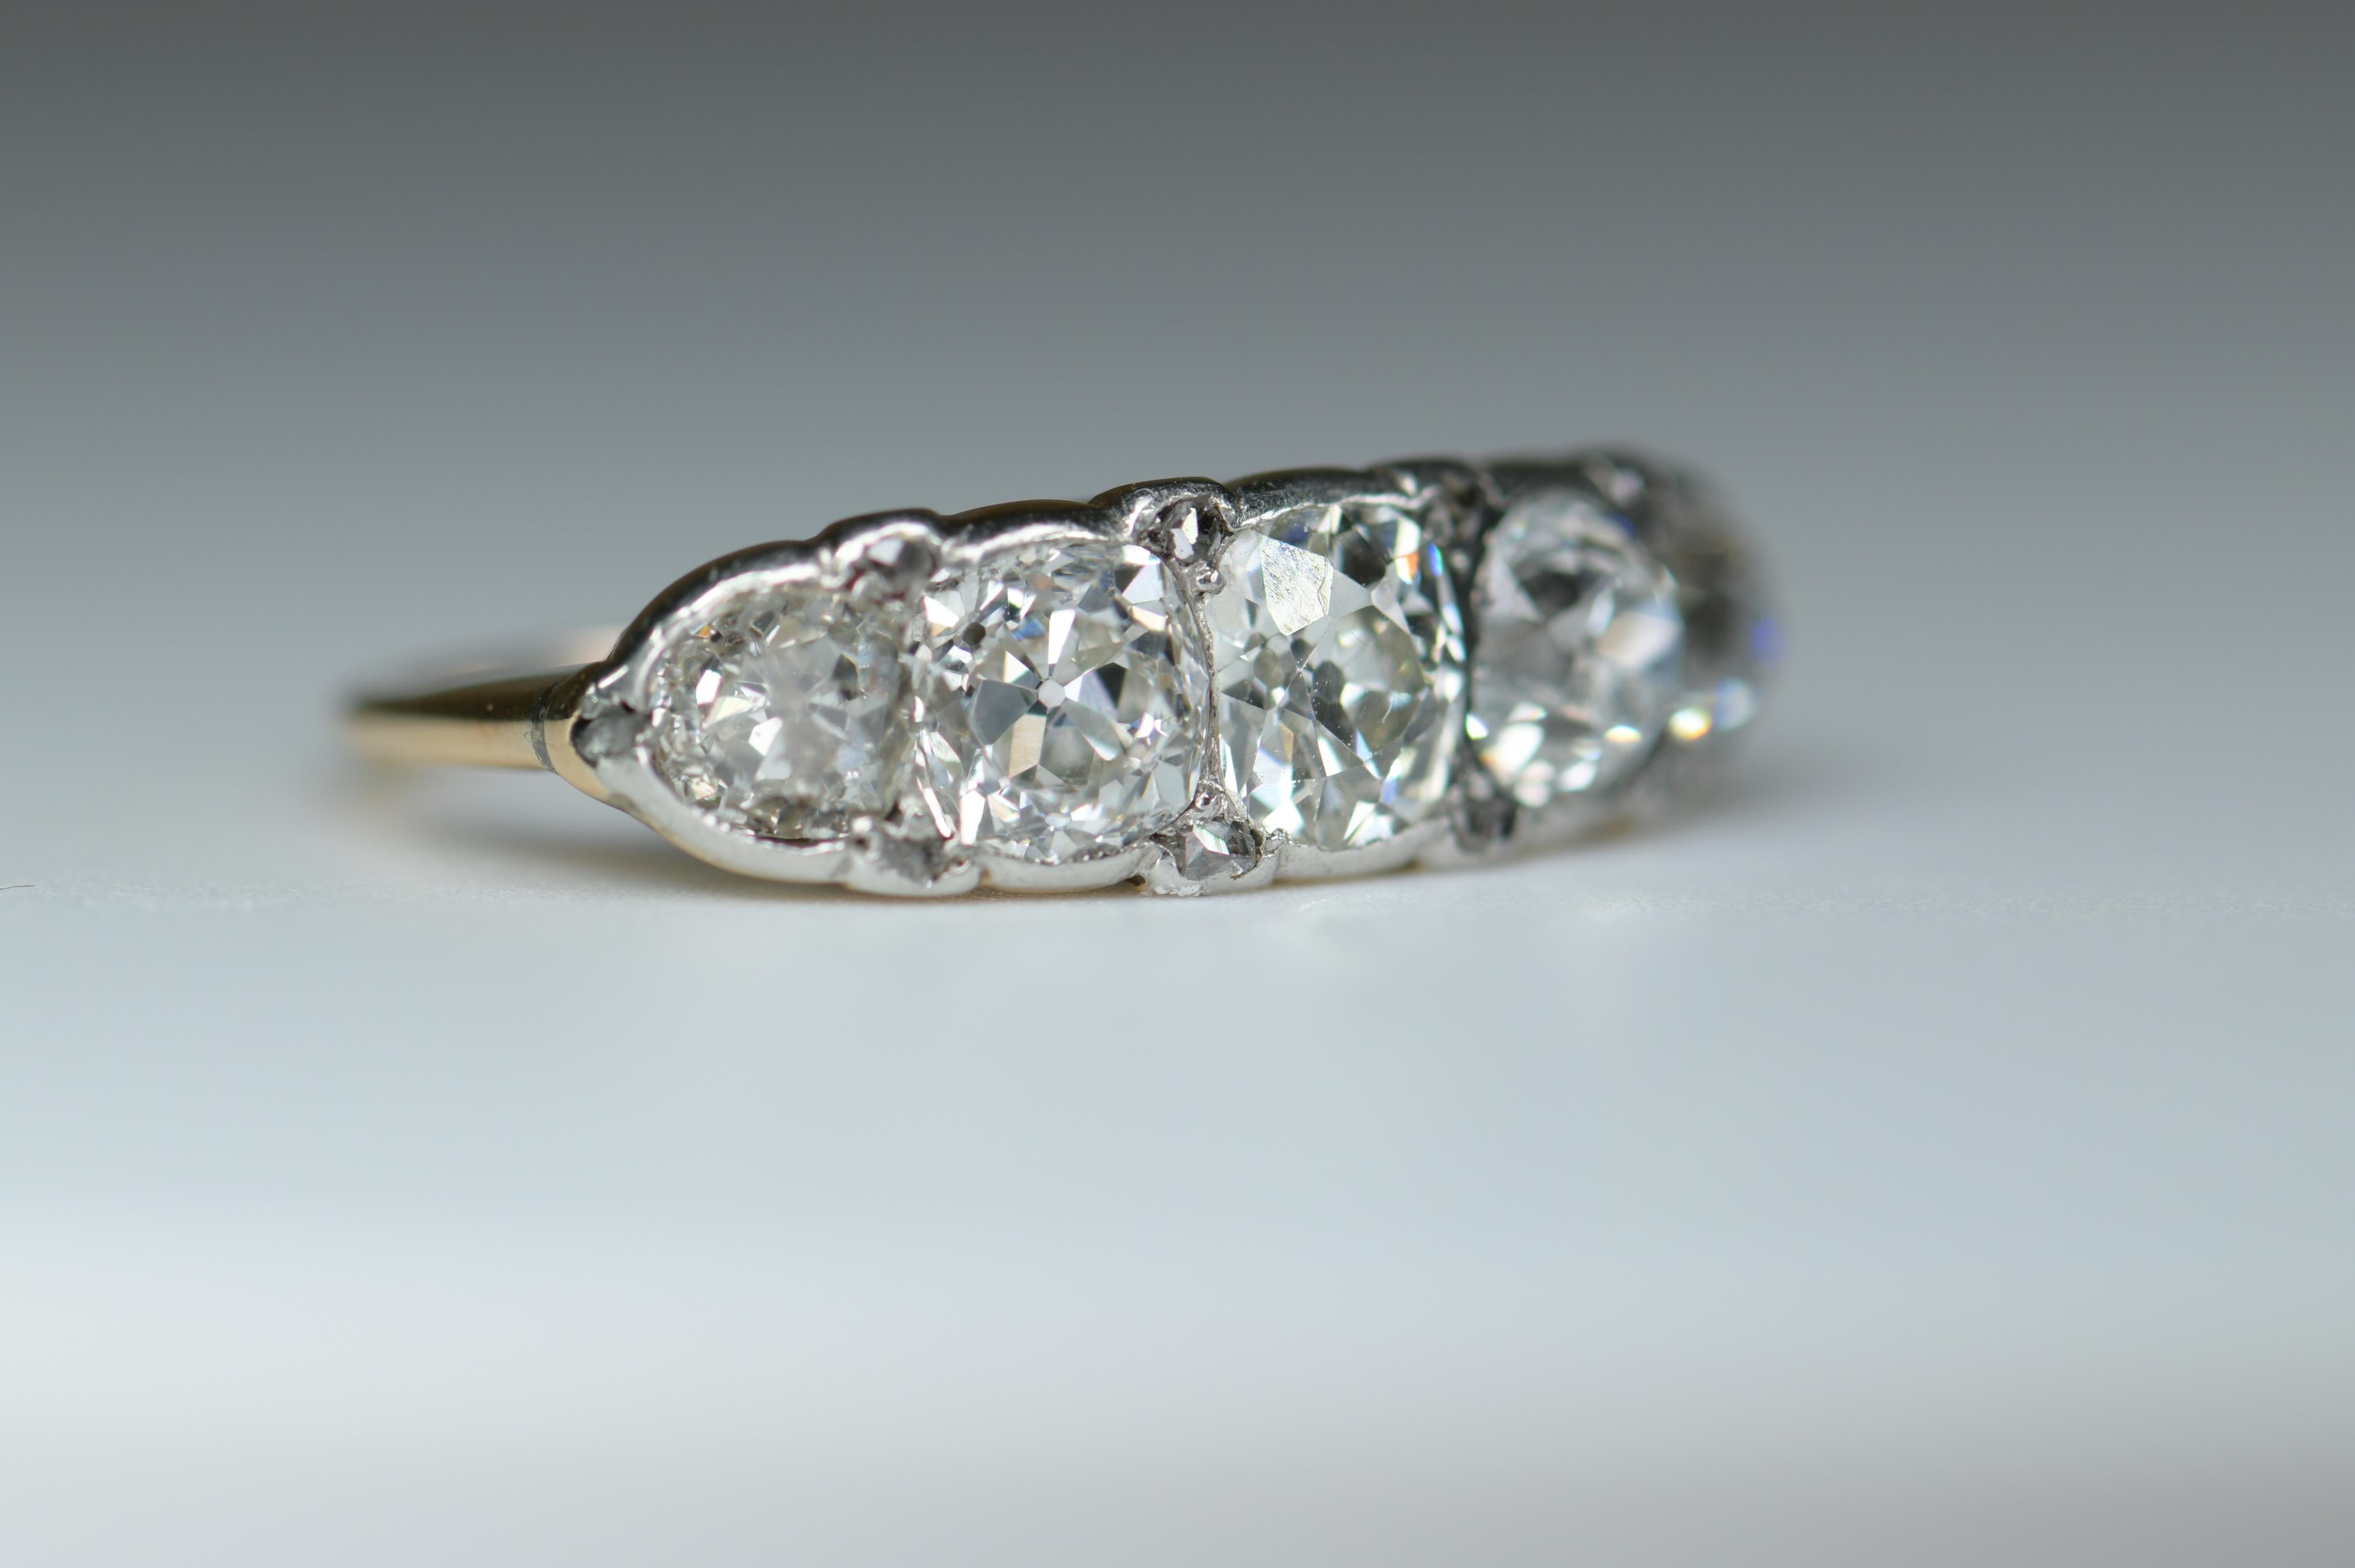 Early Victorian Classic Victorian Five-Stone Antique Diamond Ring